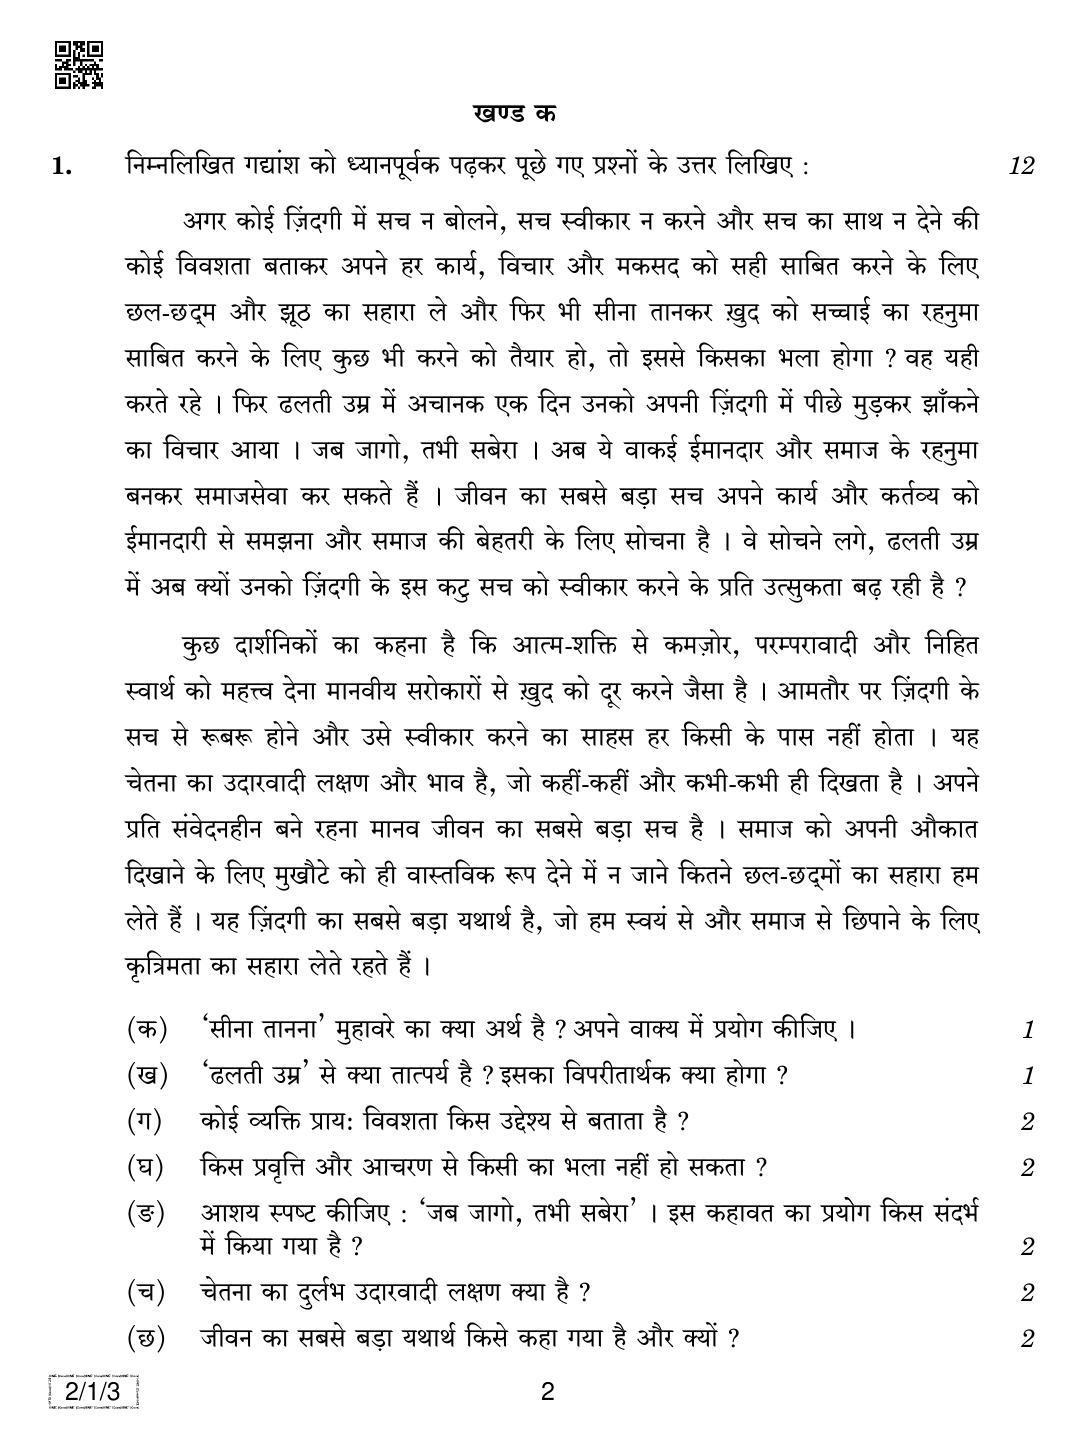 CBSE Class 12 2-1-3 HINDI CORE 2019 Compartment Question Paper - Page 2